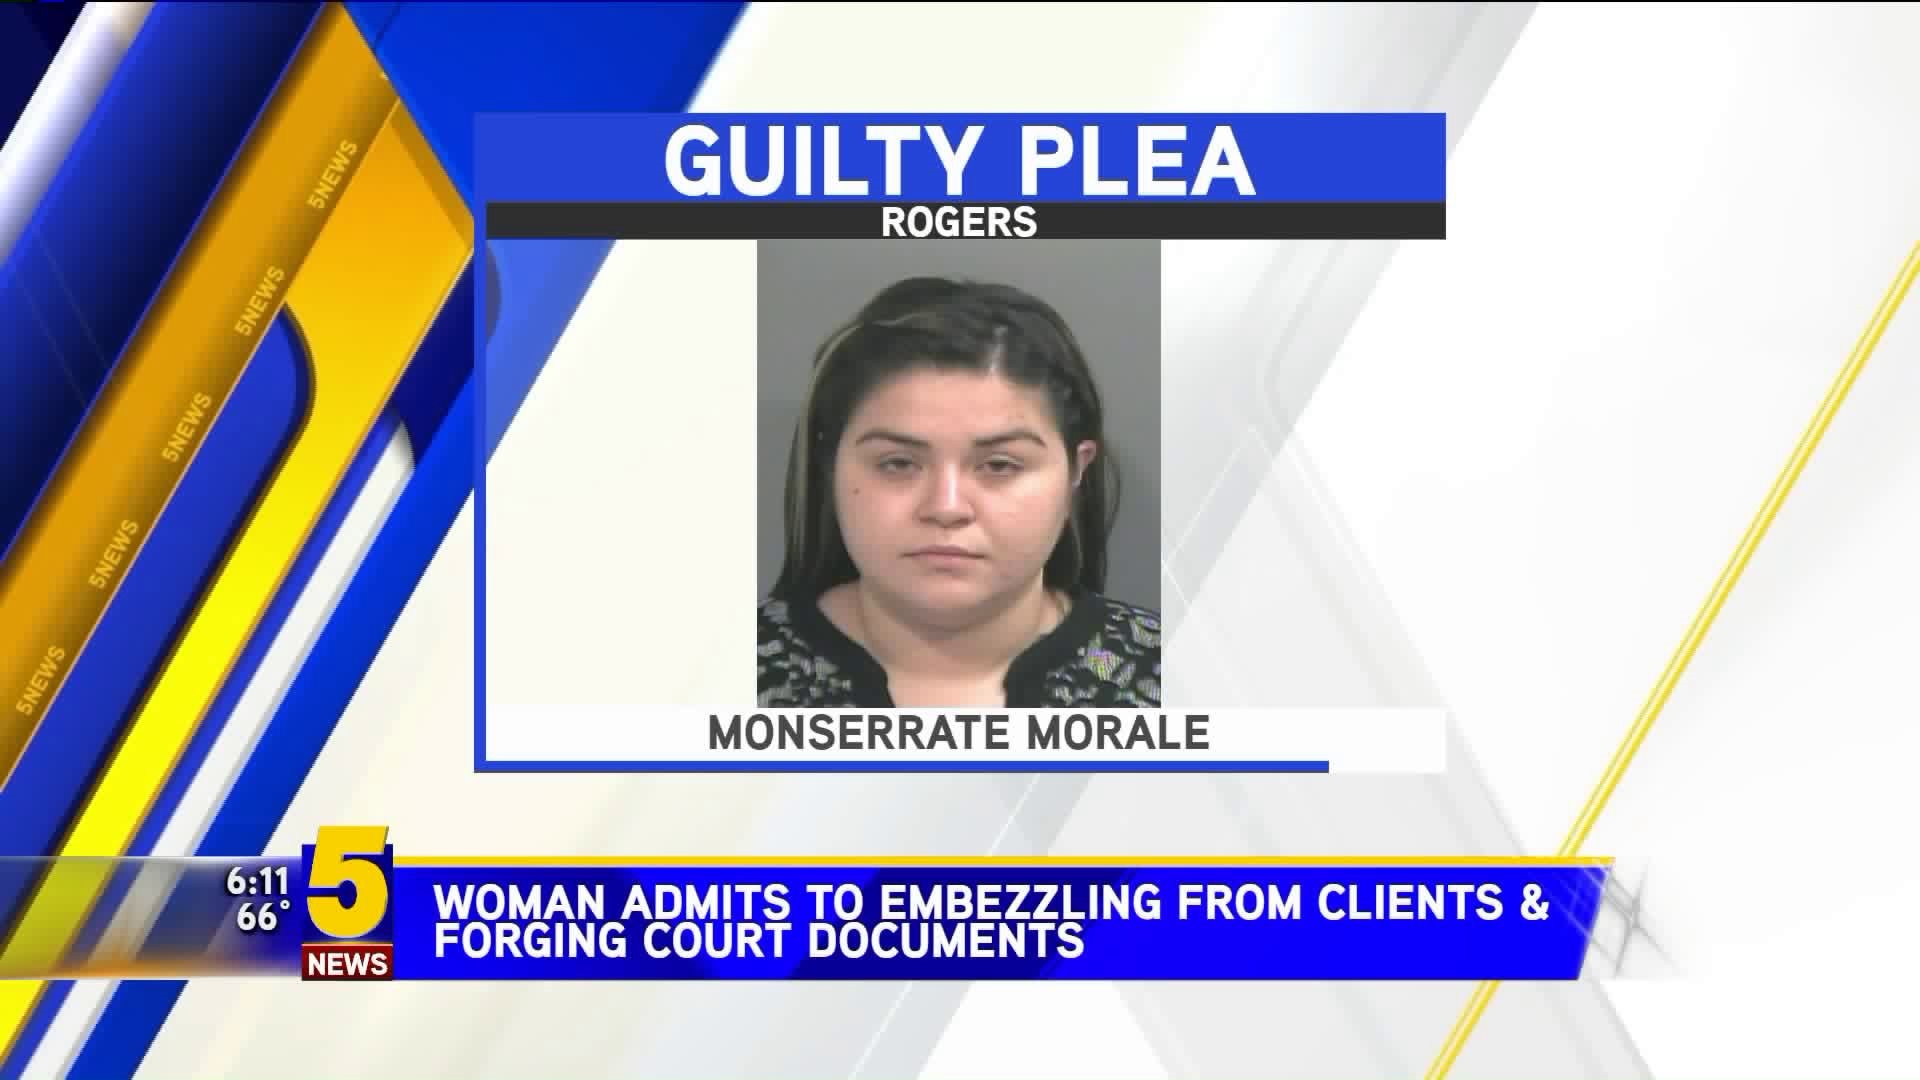 Woman Admits To Embezzling From Clients & Forging Court Documents